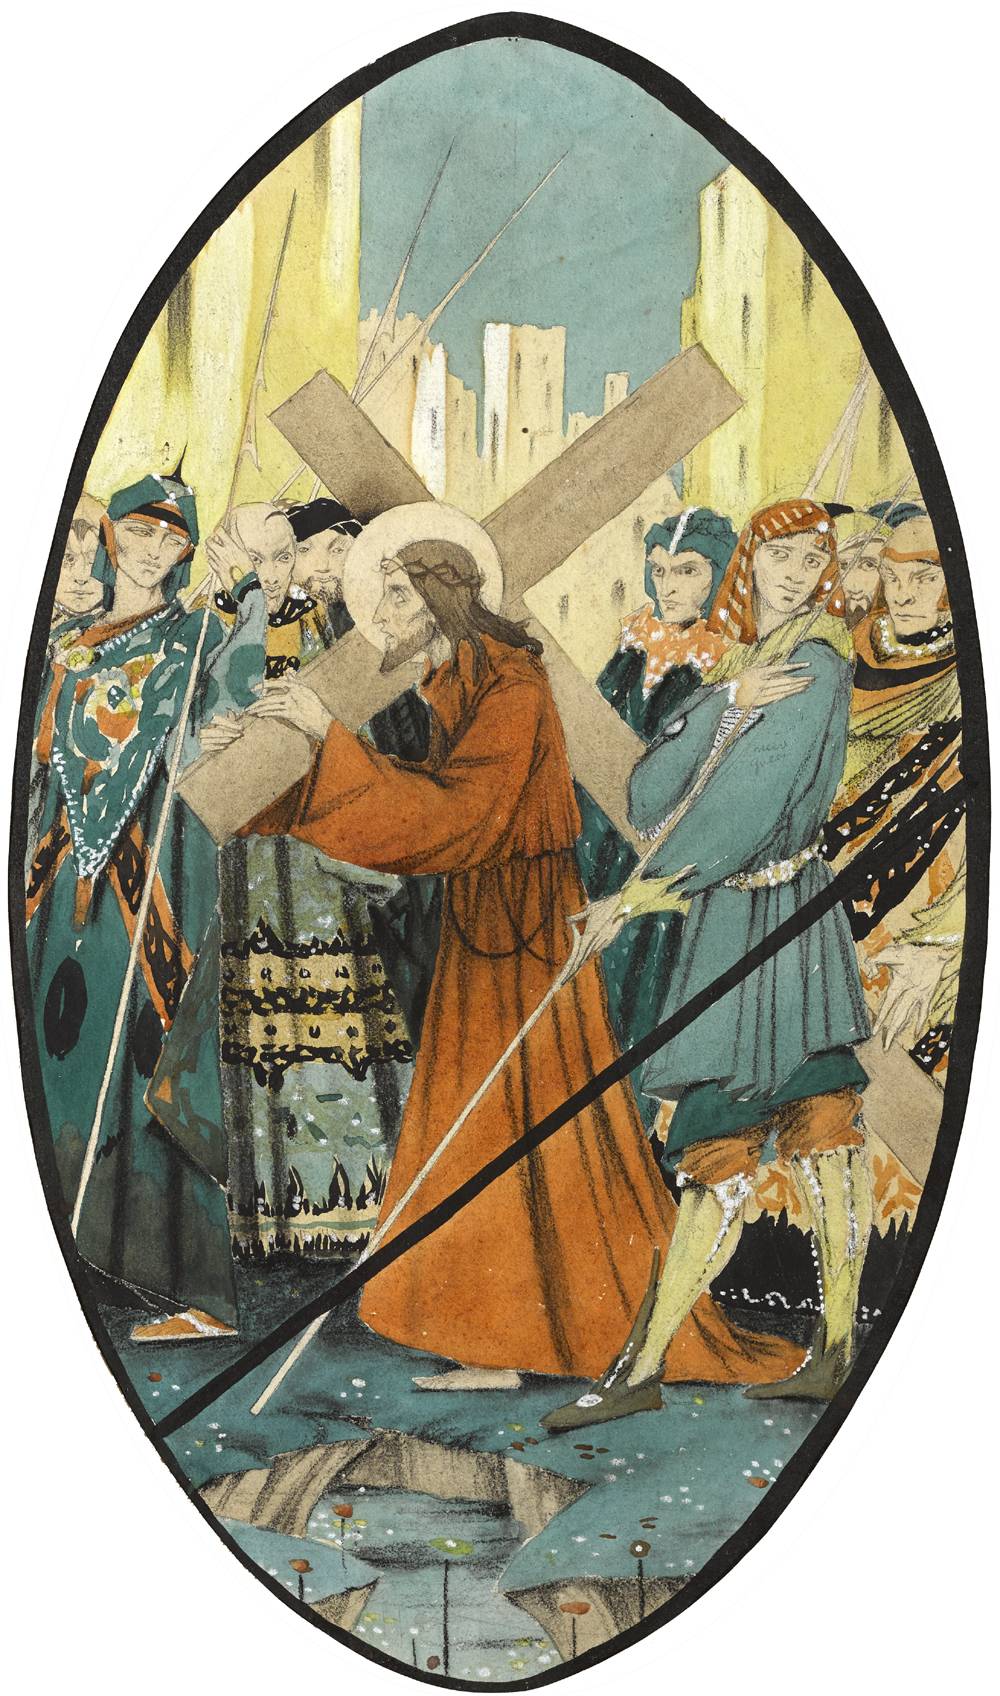 STATIONS OF THE CROSS: JESUS CARRIES HIS CROSS and JESUS FALLS FOR THE FIRST TIME, 1927 by Harry Clarke sold for 7,500 at Whyte's Auctions